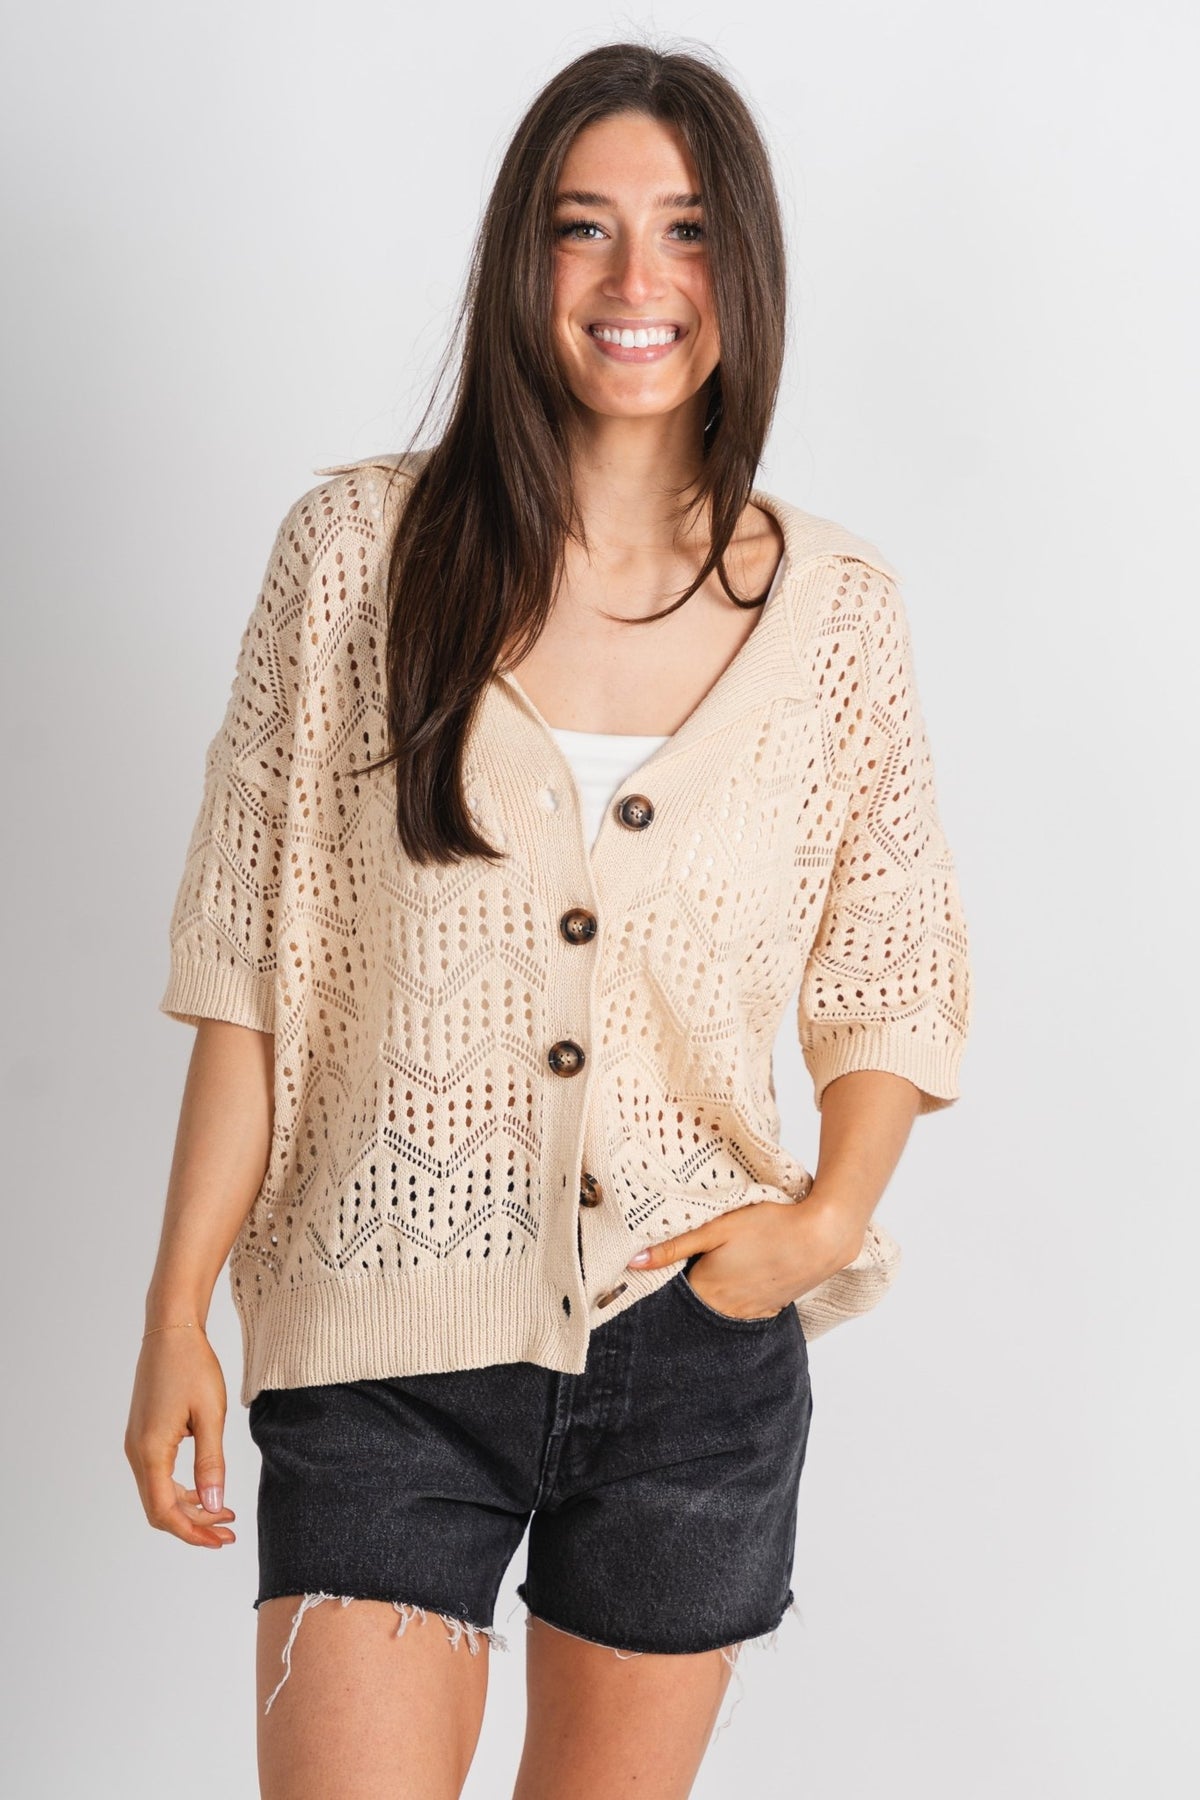 Crochet button up top cream - Trendy Top - Cute Vacation Collection at Lush Fashion Lounge Boutique in Oklahoma City